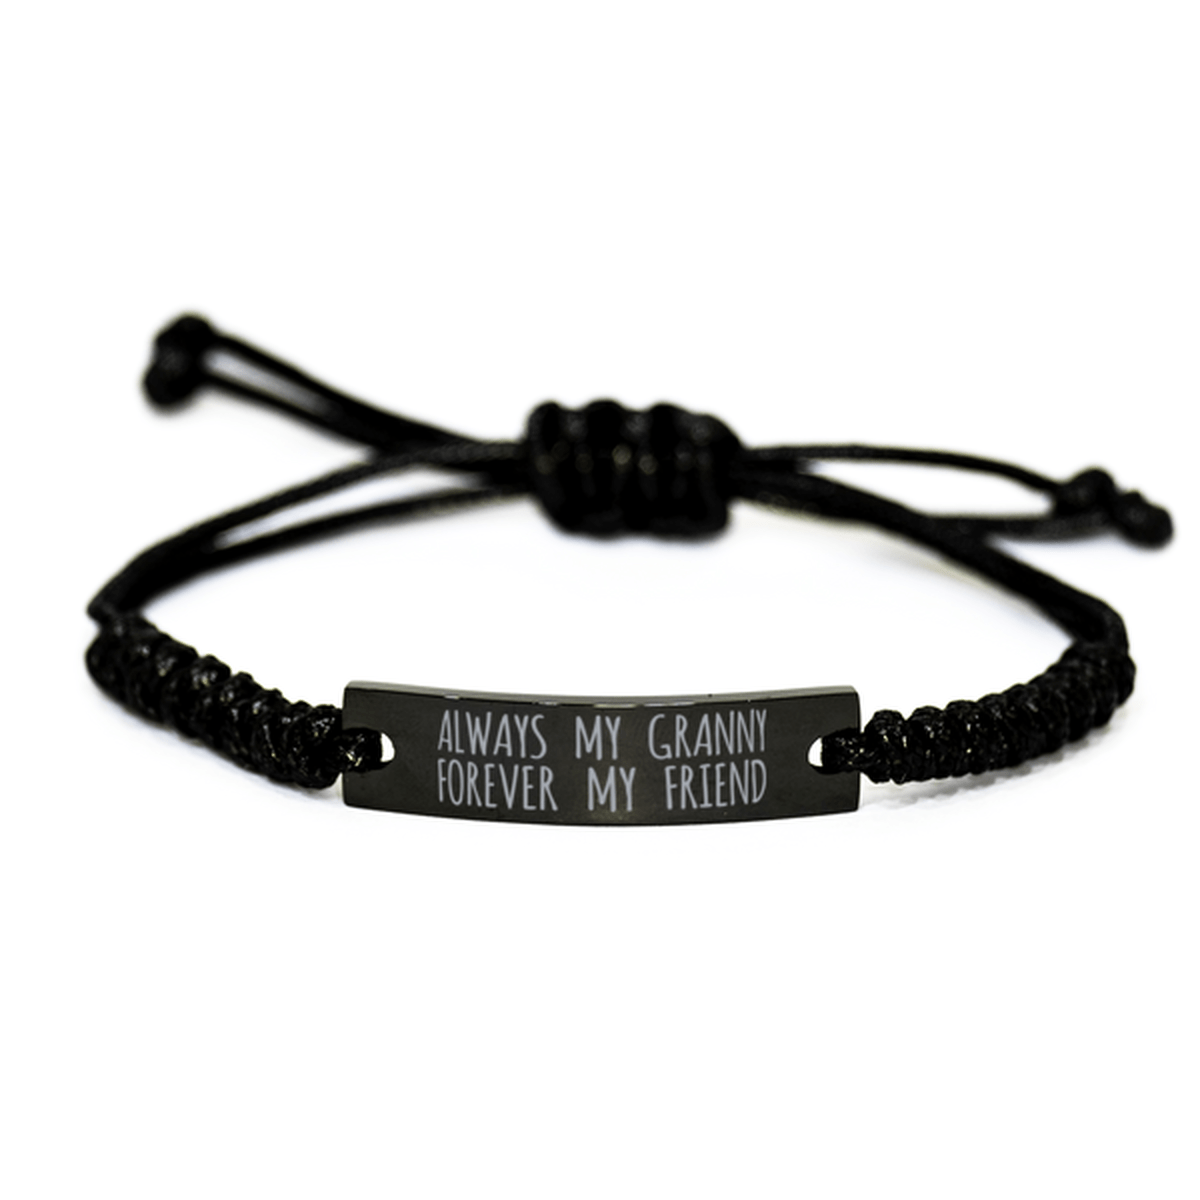 Inspirational Granny Black Rope Bracelet, Always My Granny Forever My Friend, Best Birthday Gifts For Family